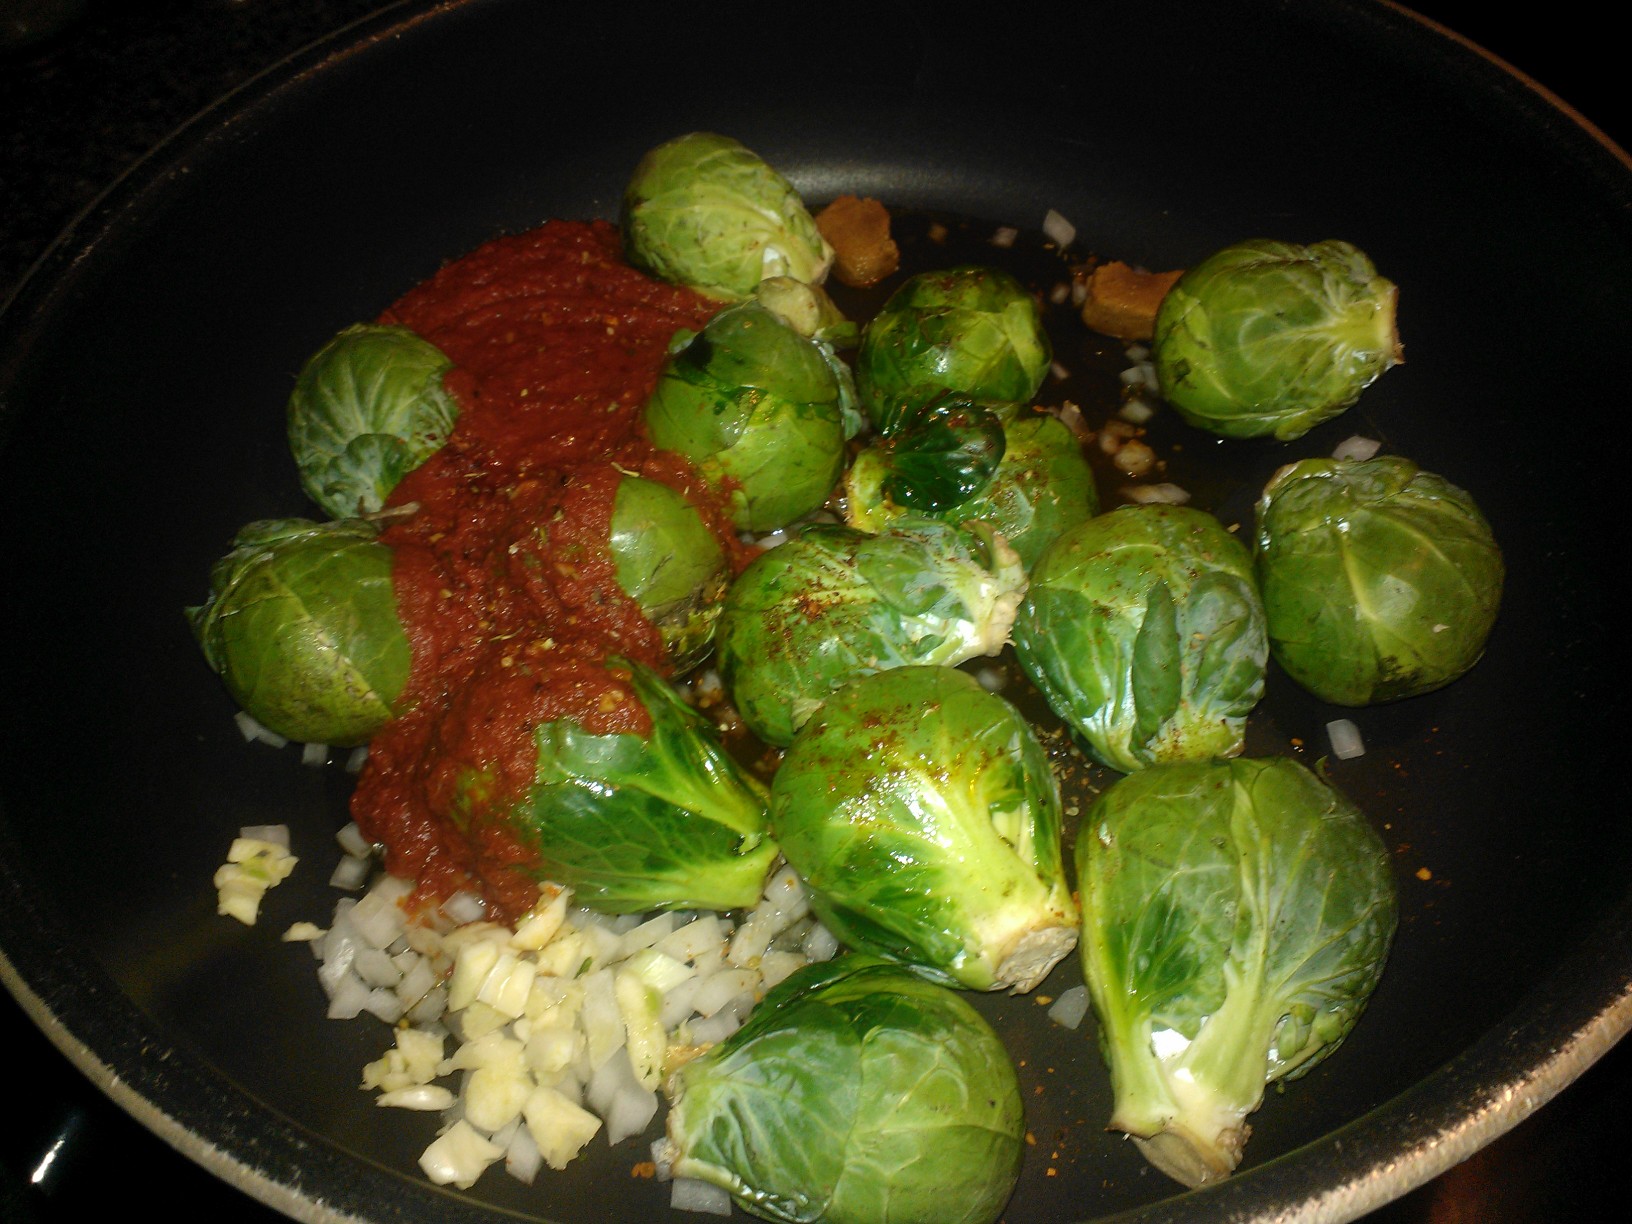 Thumbnail image for brussel-sprouts.jpg